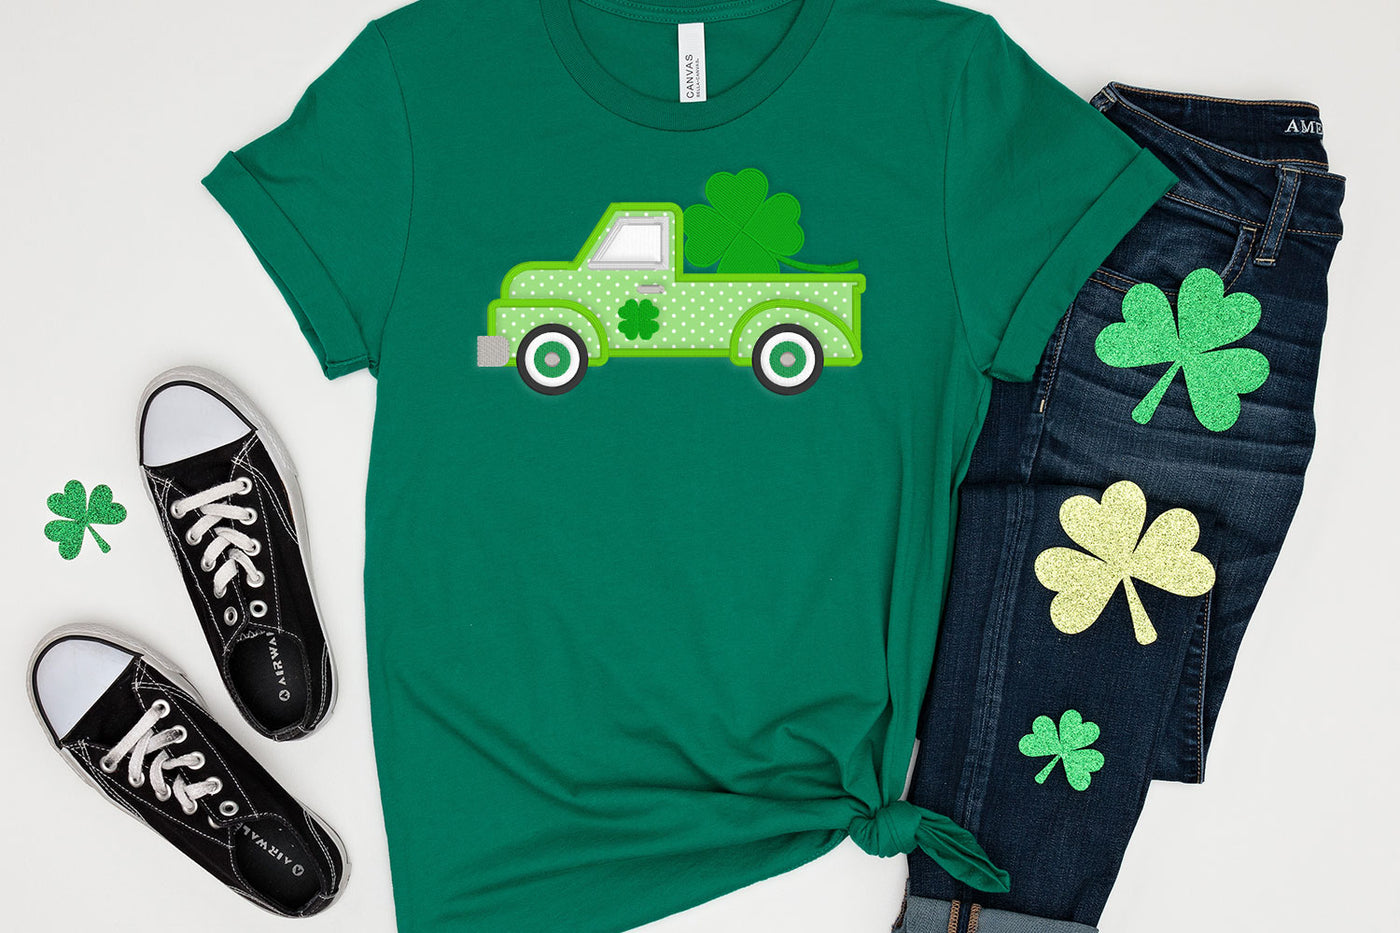 Vintage Truck with Shamrock Applique Embroidery File